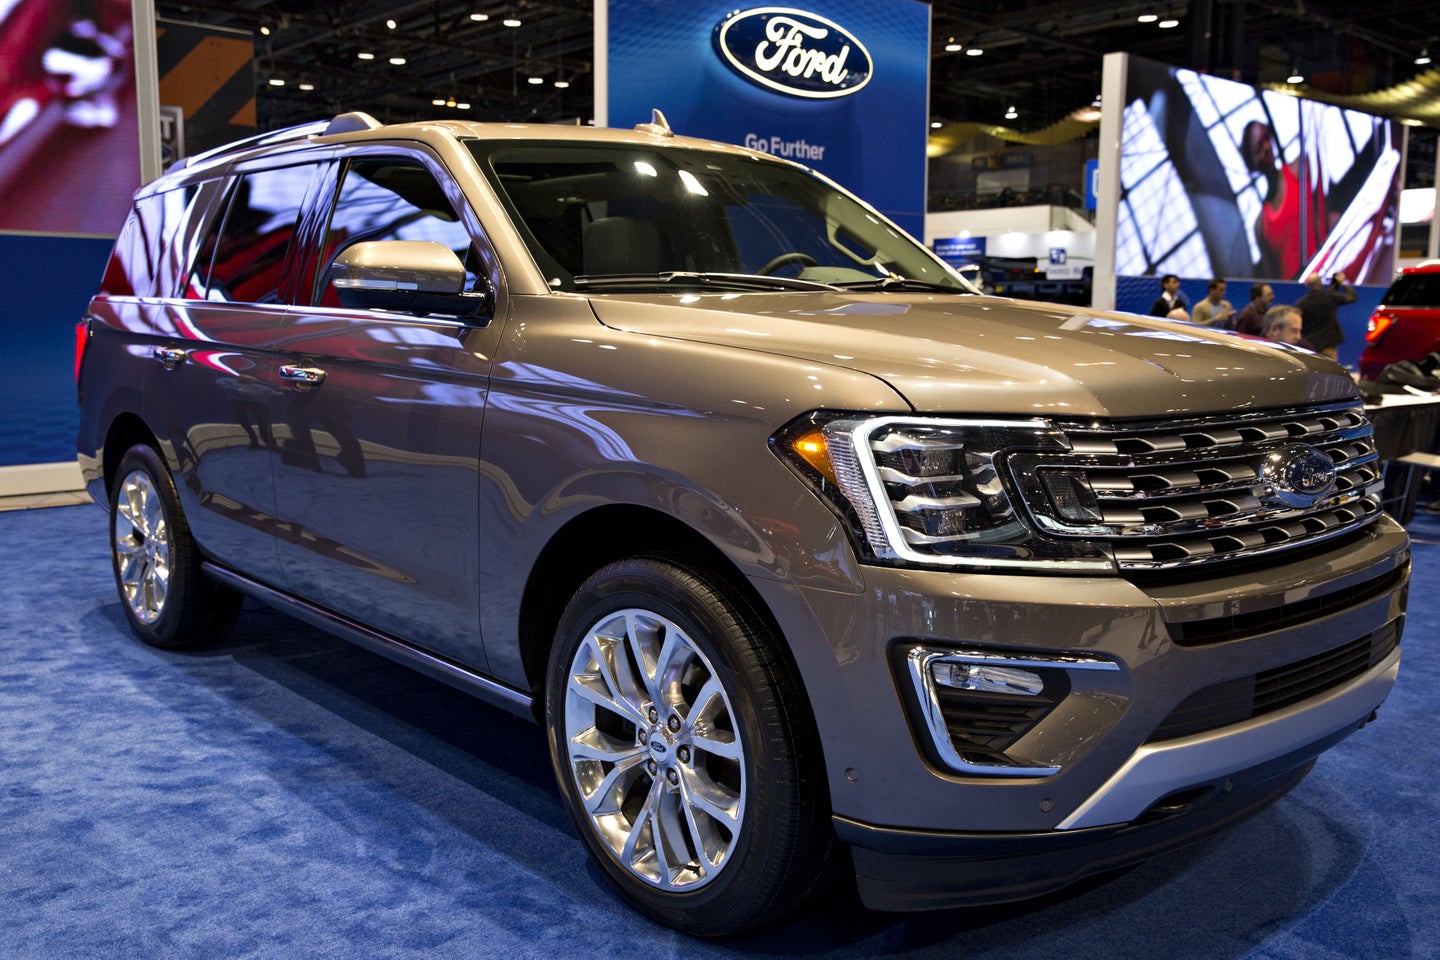 2018 Ford Expedition to Get Live-Streamed Cable, Satellite TV